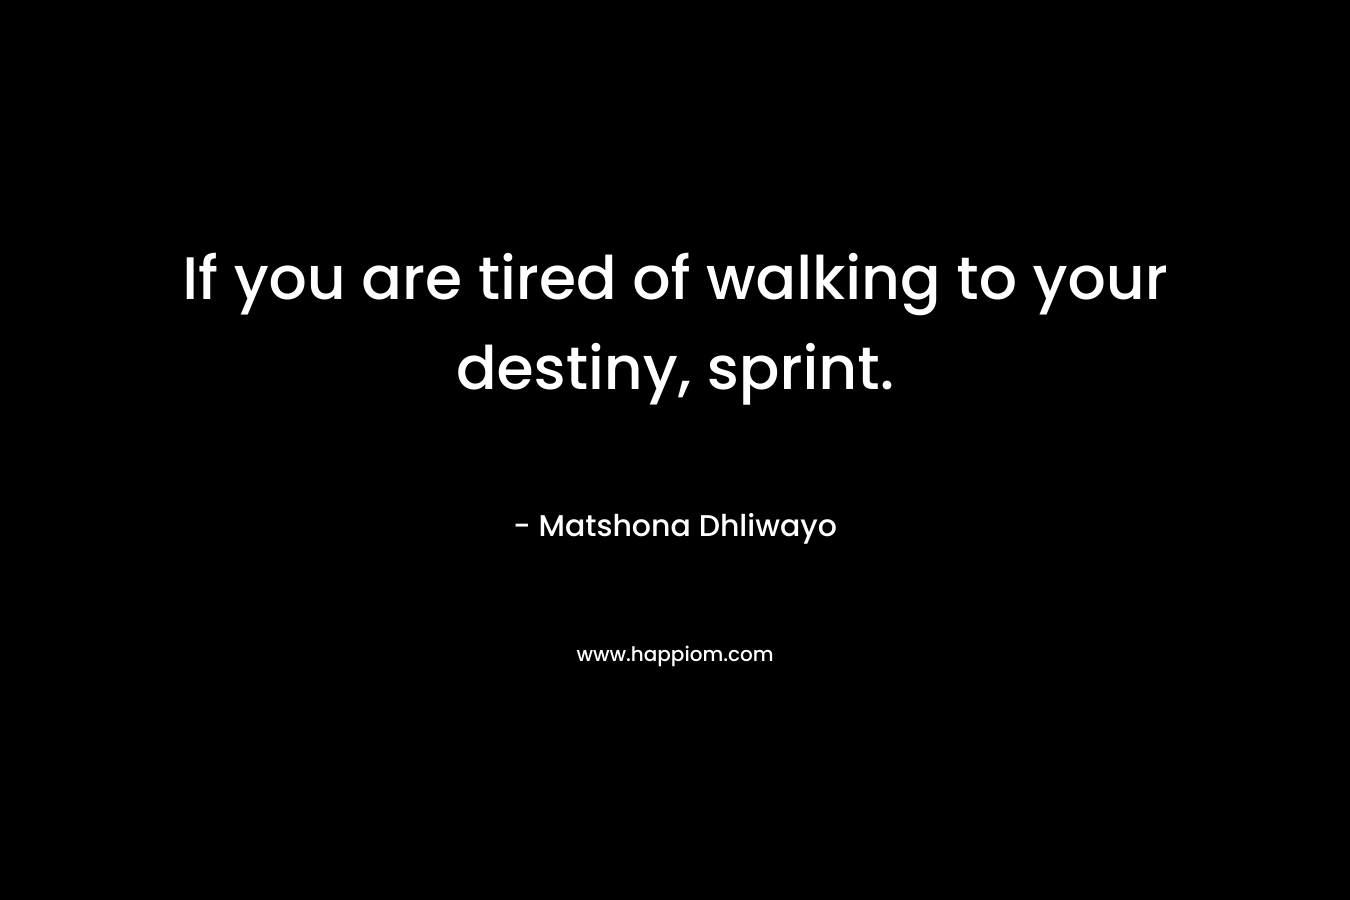 If you are tired of walking to your destiny, sprint. – Matshona Dhliwayo